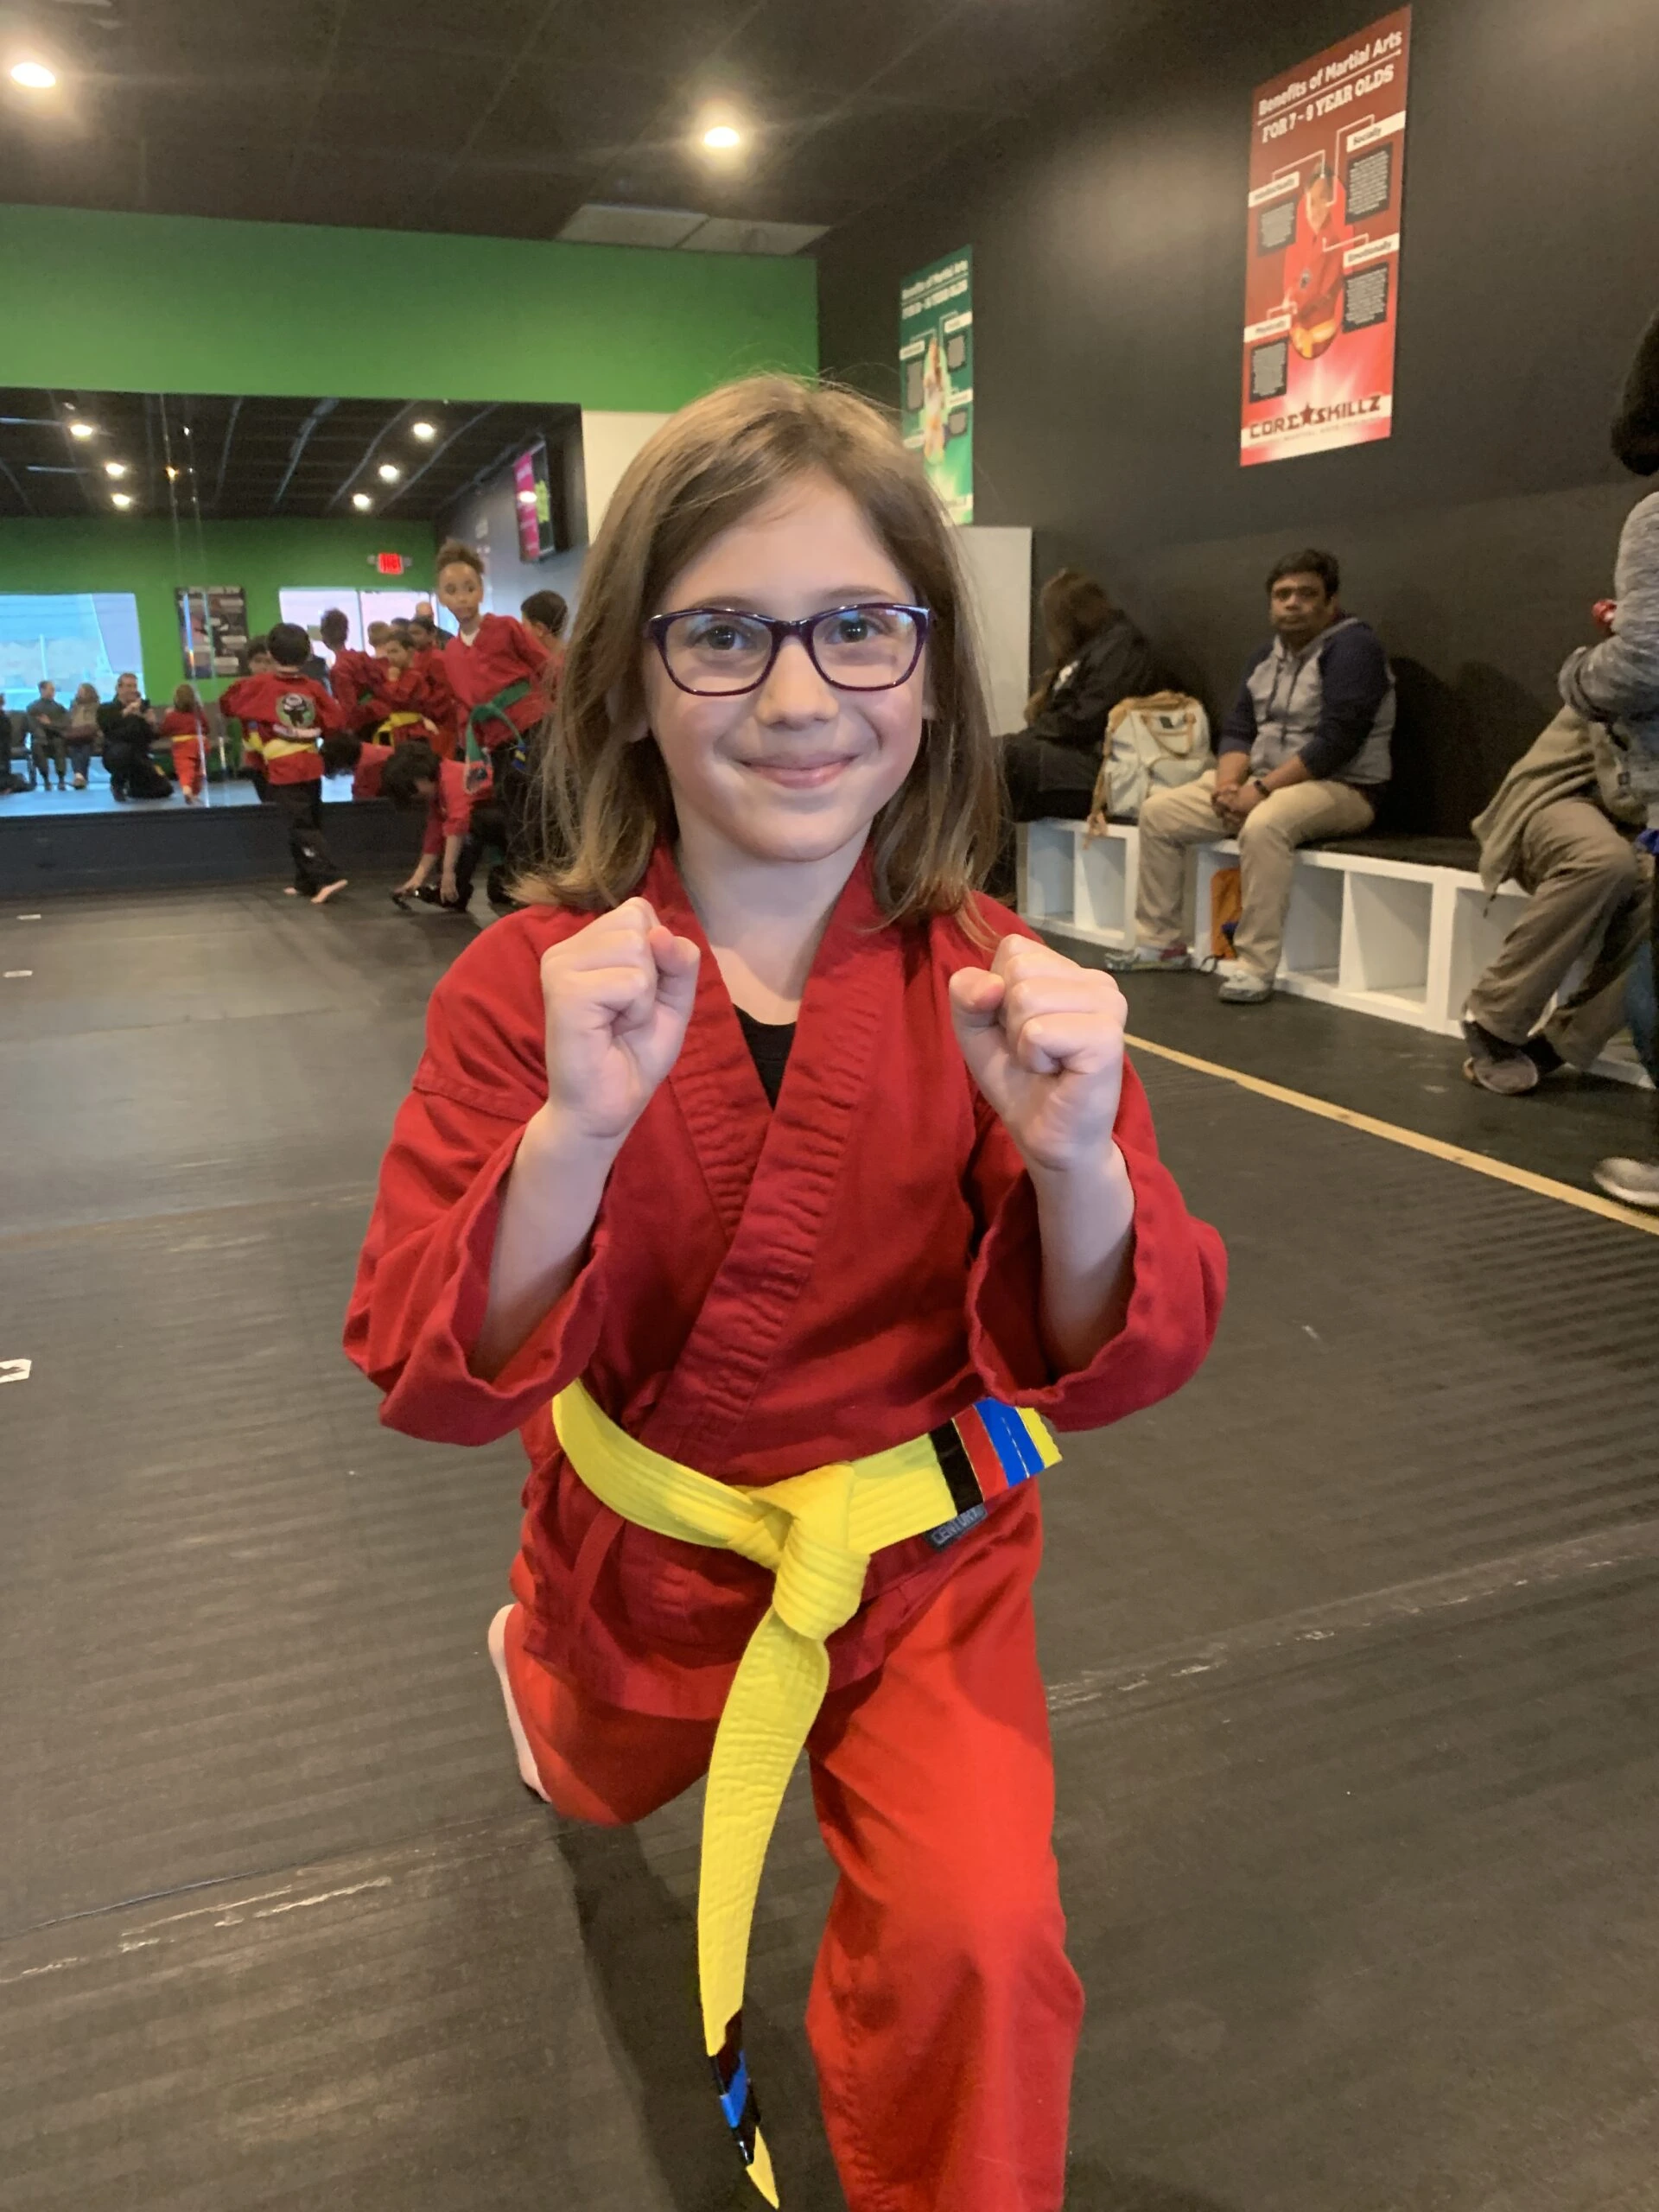 a girl with glasses, smiling, in a karate pose.